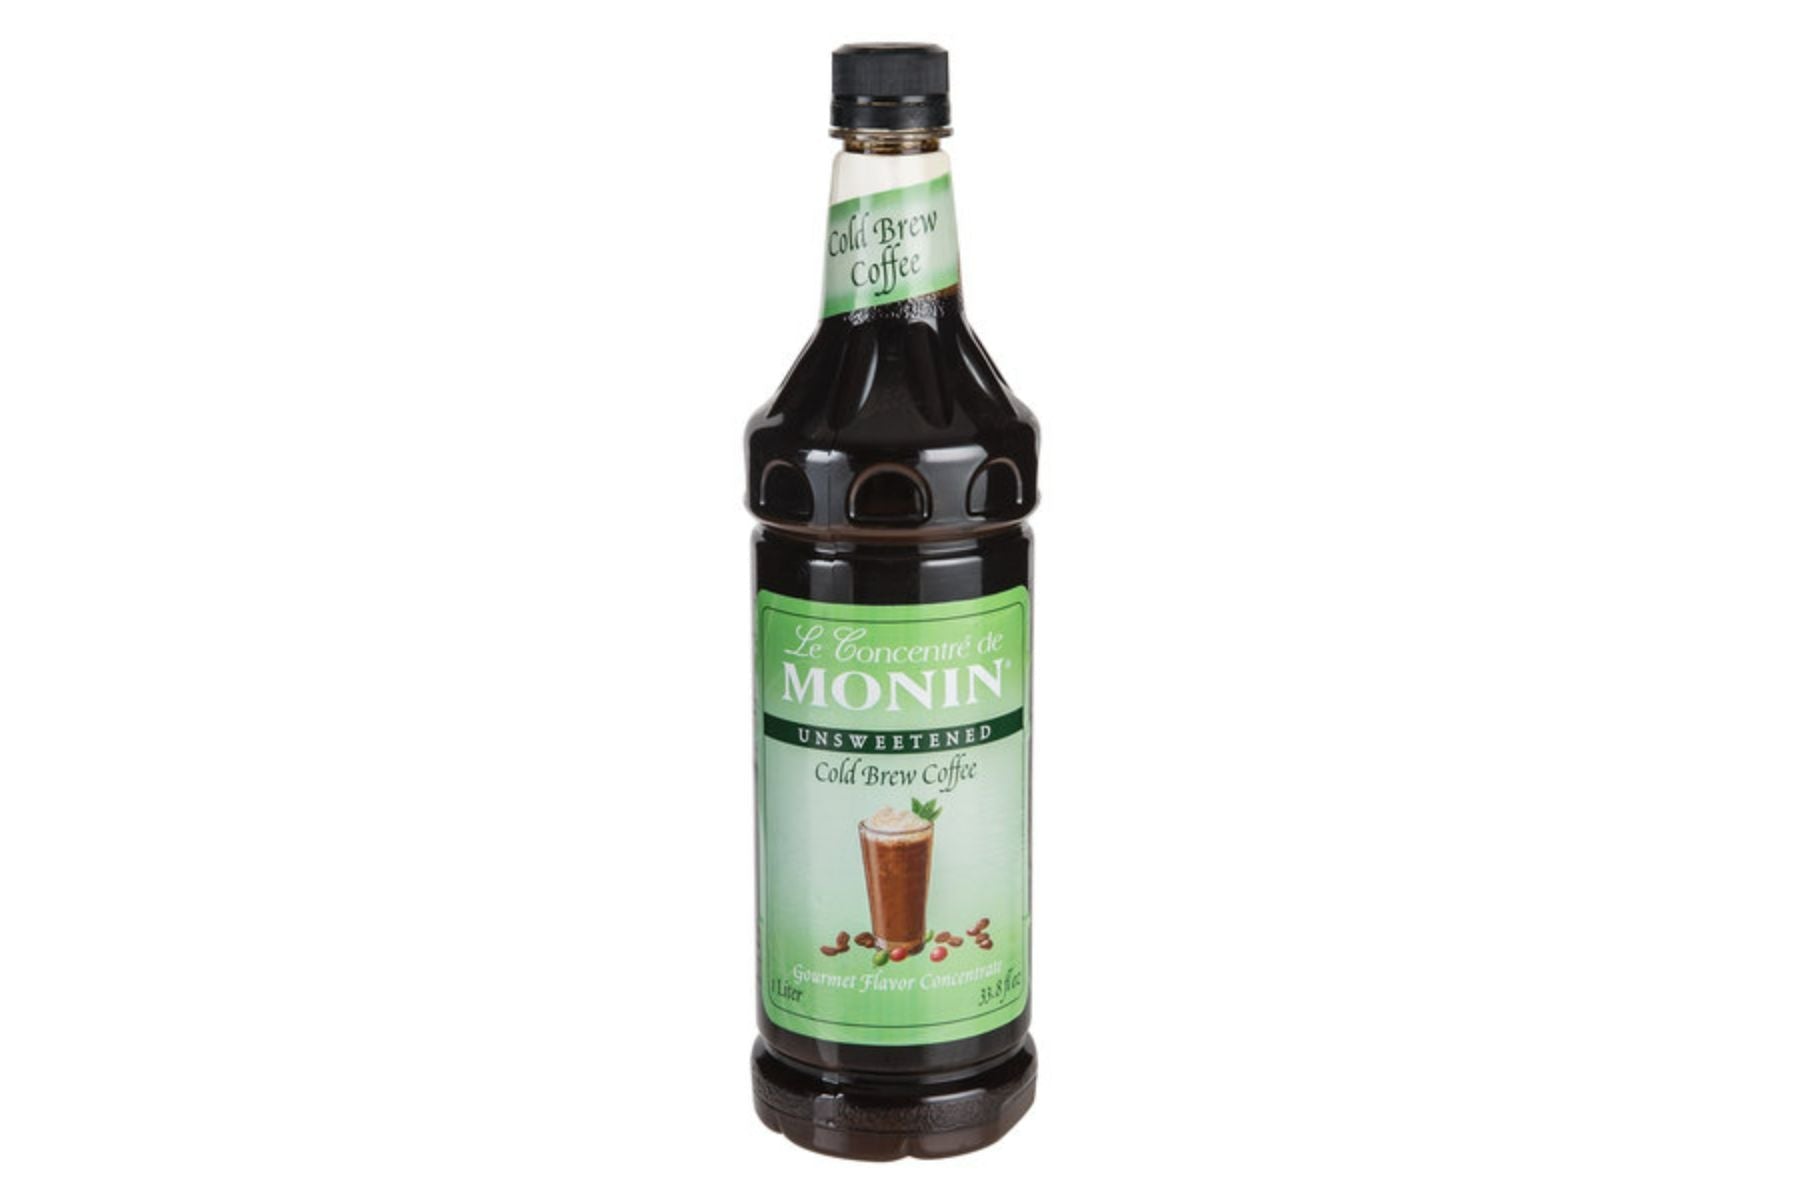 Monin Coffee Concentrate - 1 Liter Cold Brew Coffee